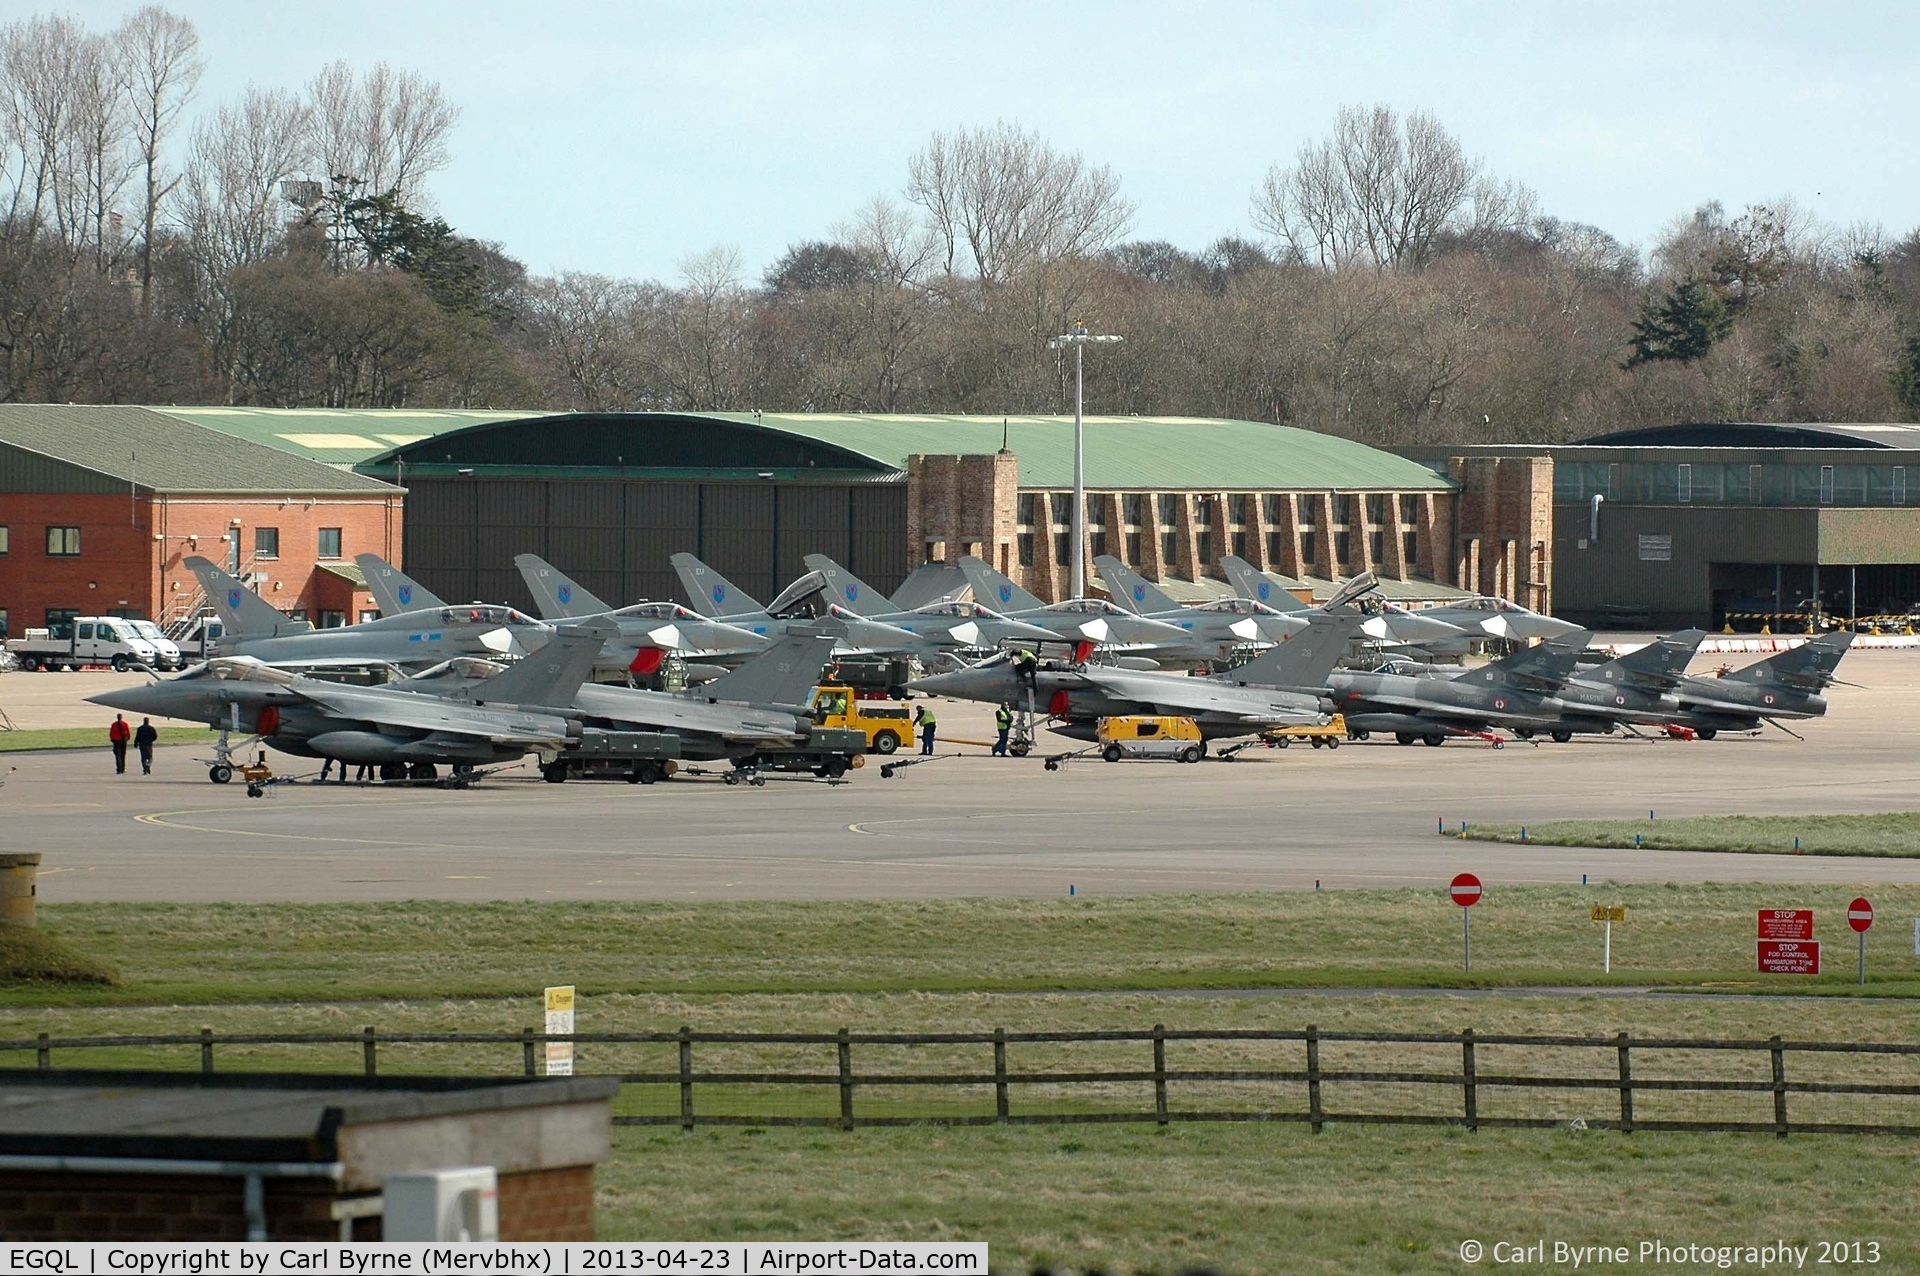 RAF Leuchars Airport, Leuchars, Scotland United Kingdom (EGQL) - French Navy aircraft operating as part of the Joint Warrior exercise.